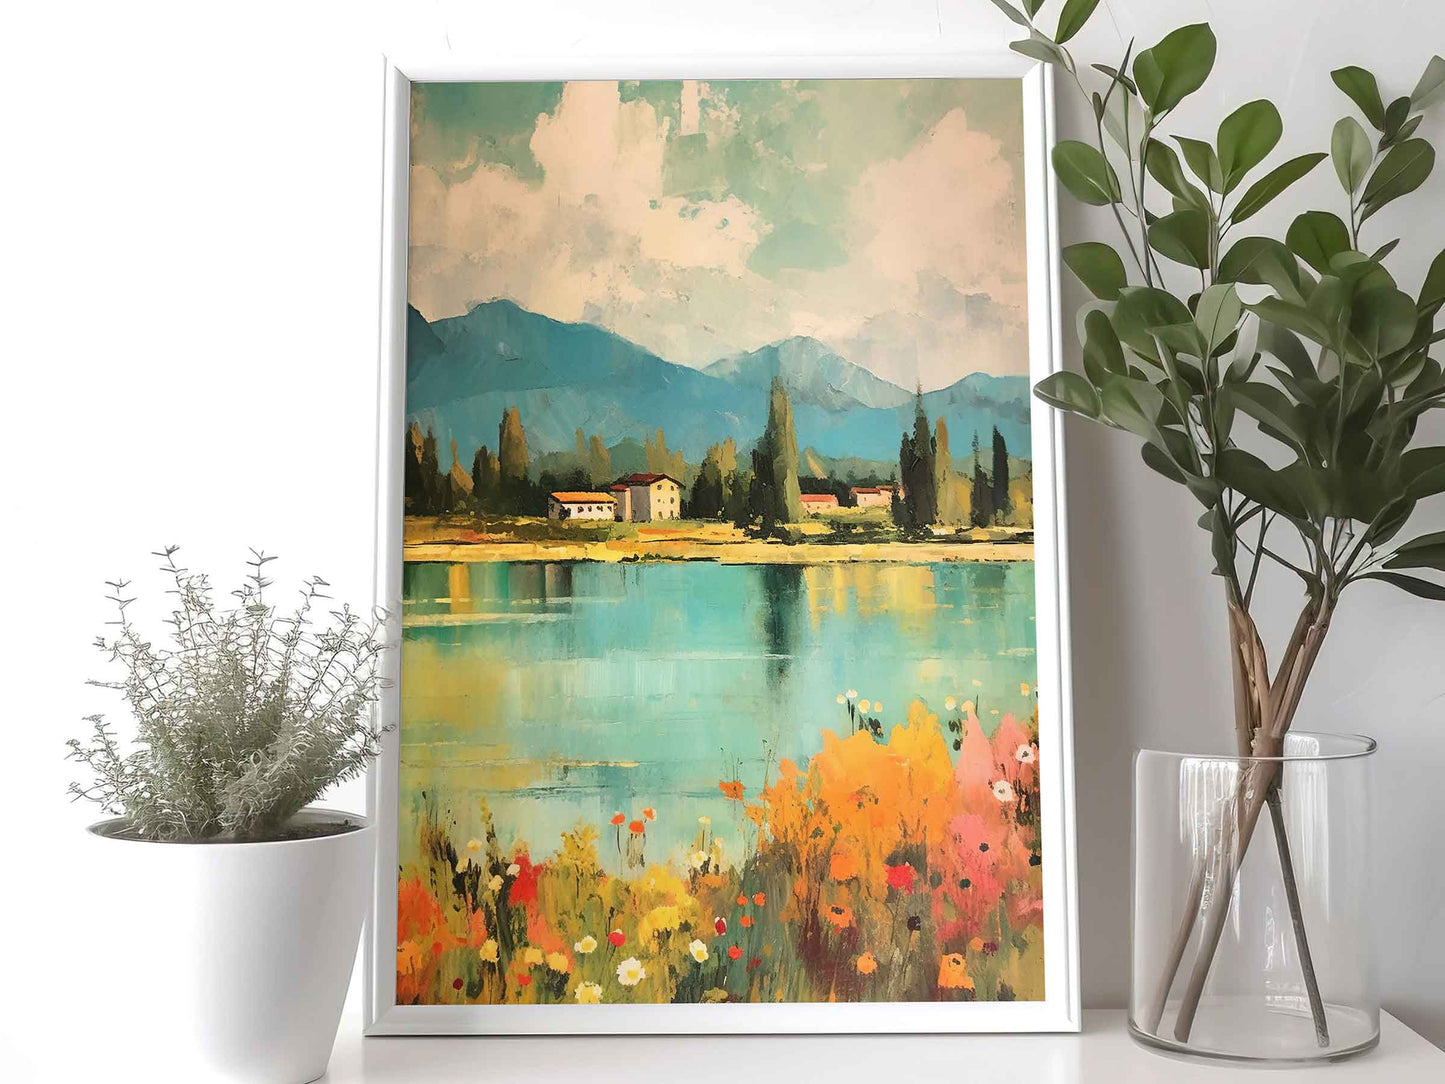 Framed Image of Italian Scenic Travel & Lifestyle Landscapes Wall Art Prints of Italy